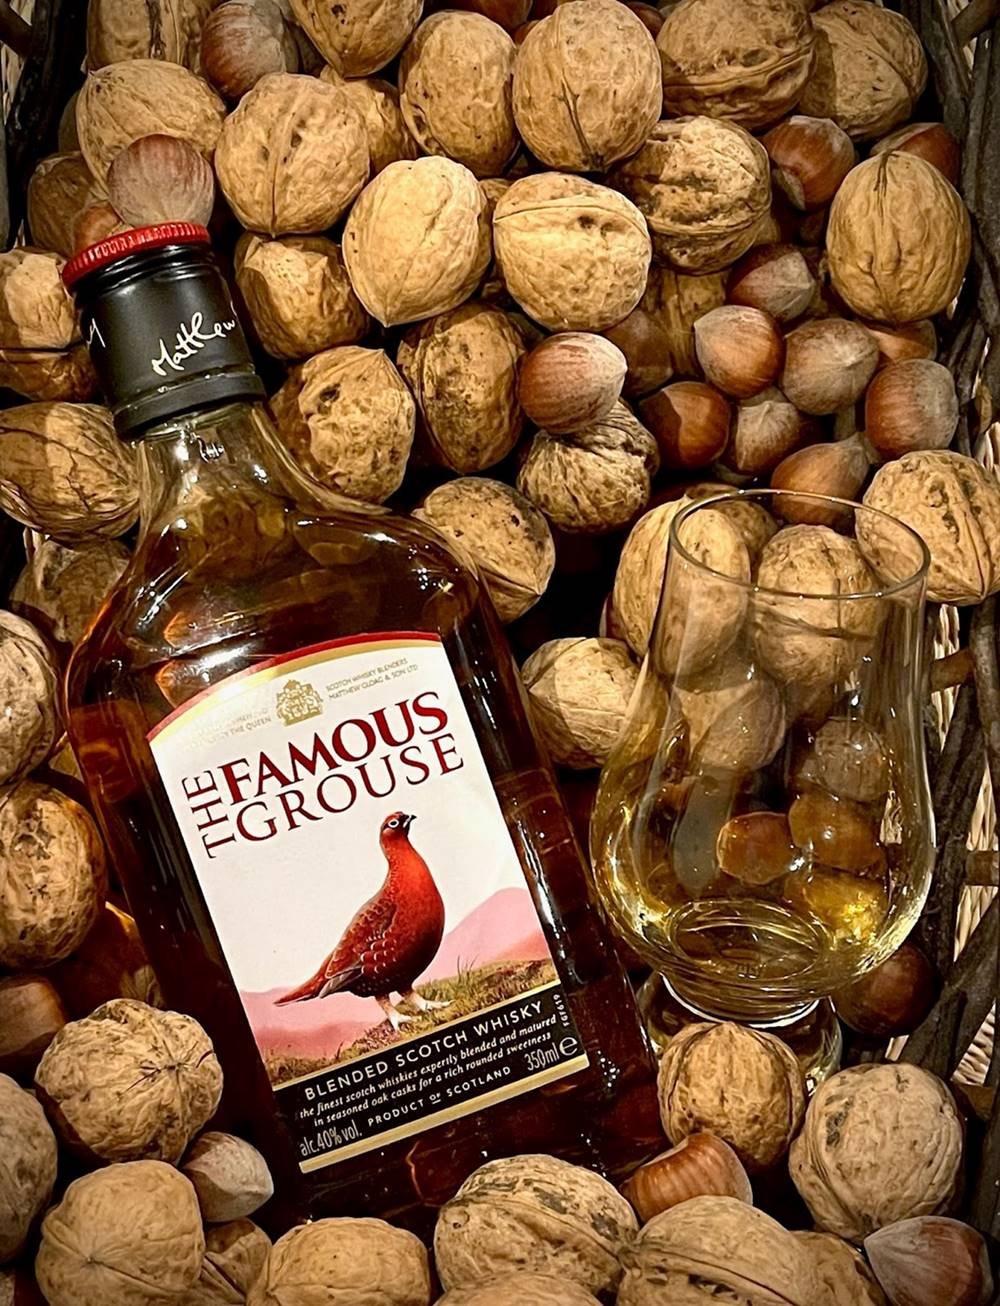 10 Things You Should Know About Monkey Shoulder